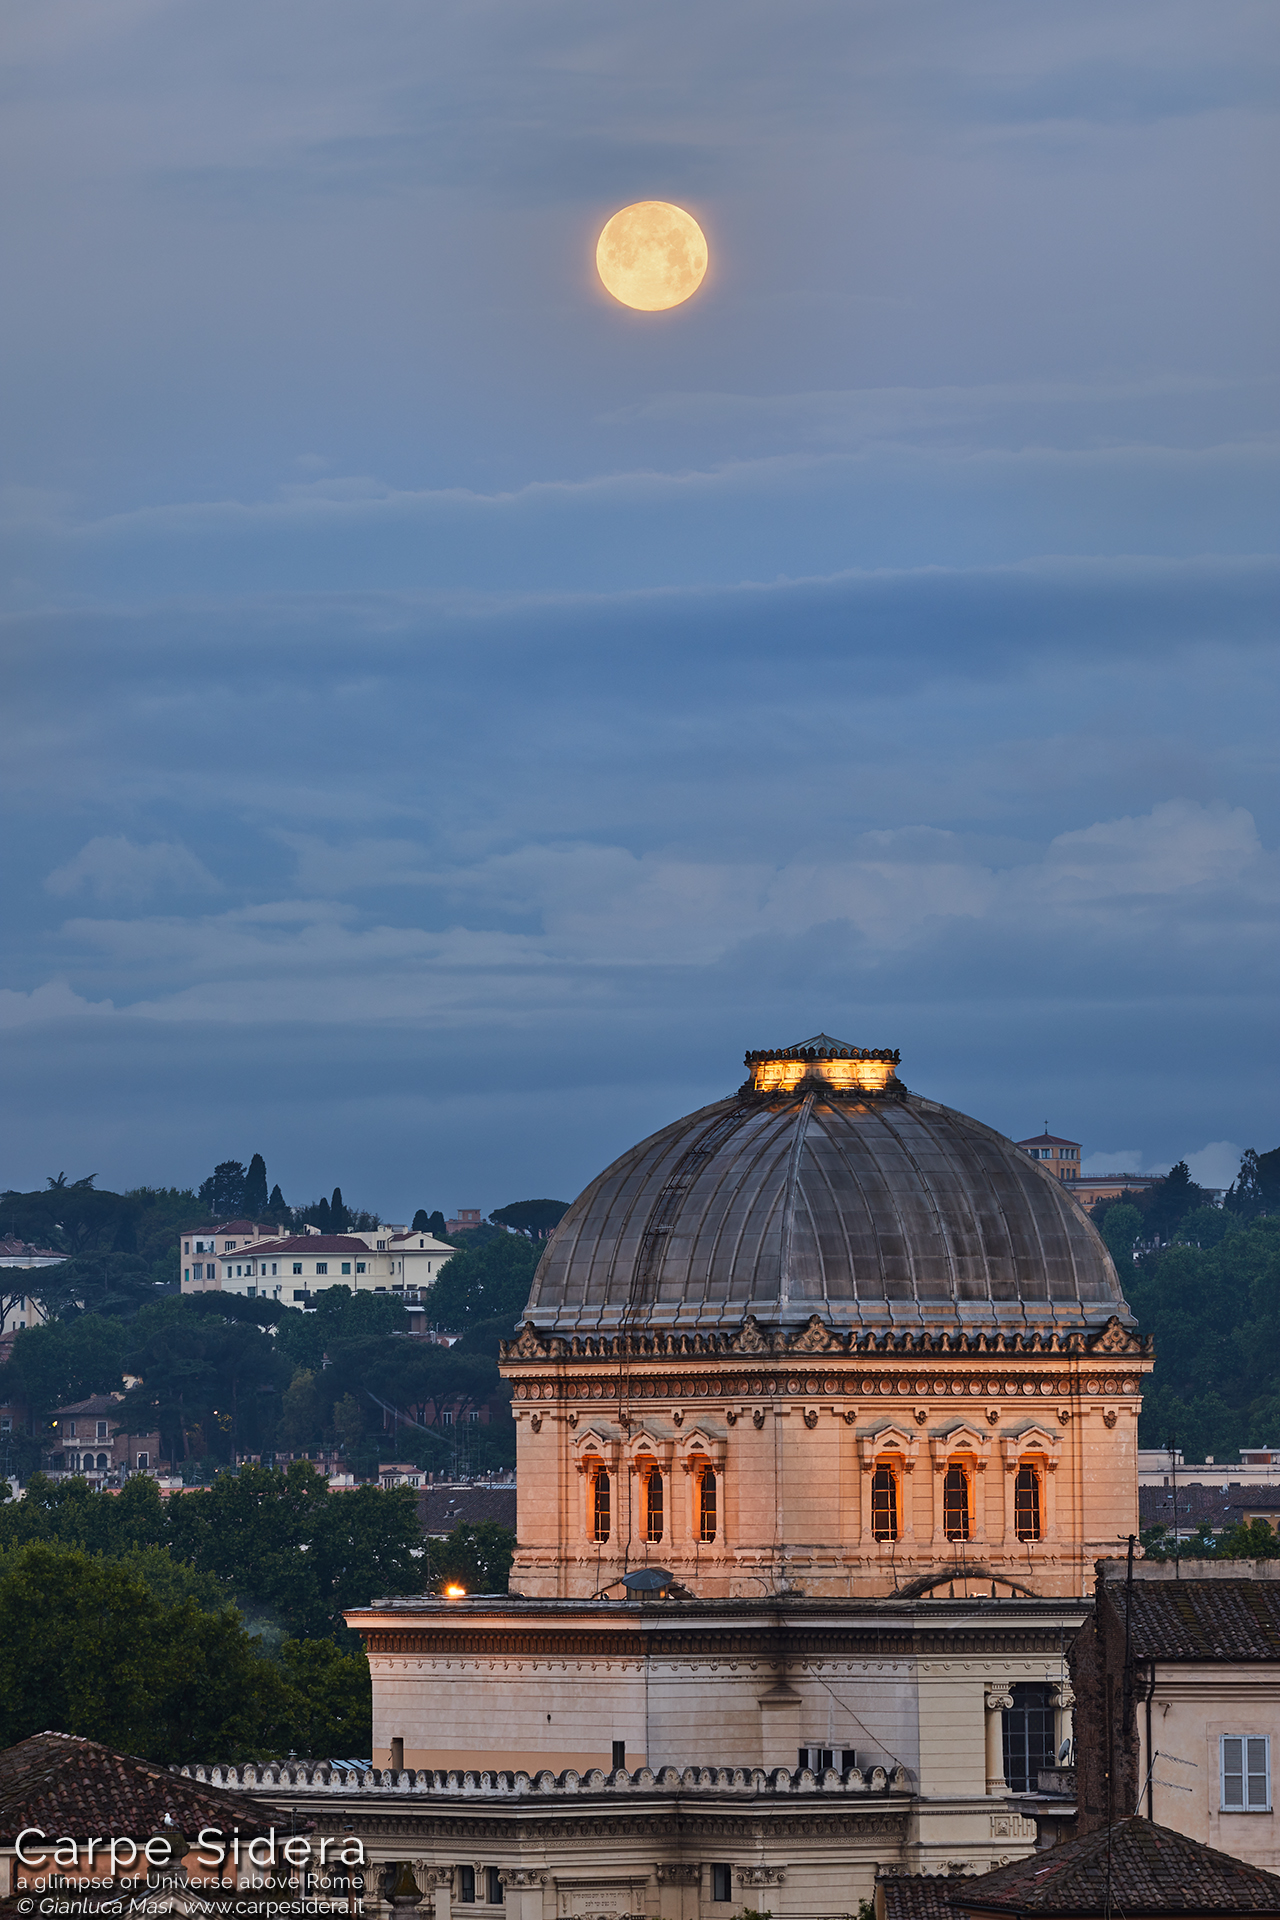 The May 2019 "Blue Moon" is ready to set and hangs above the Great Synagogue of Rome